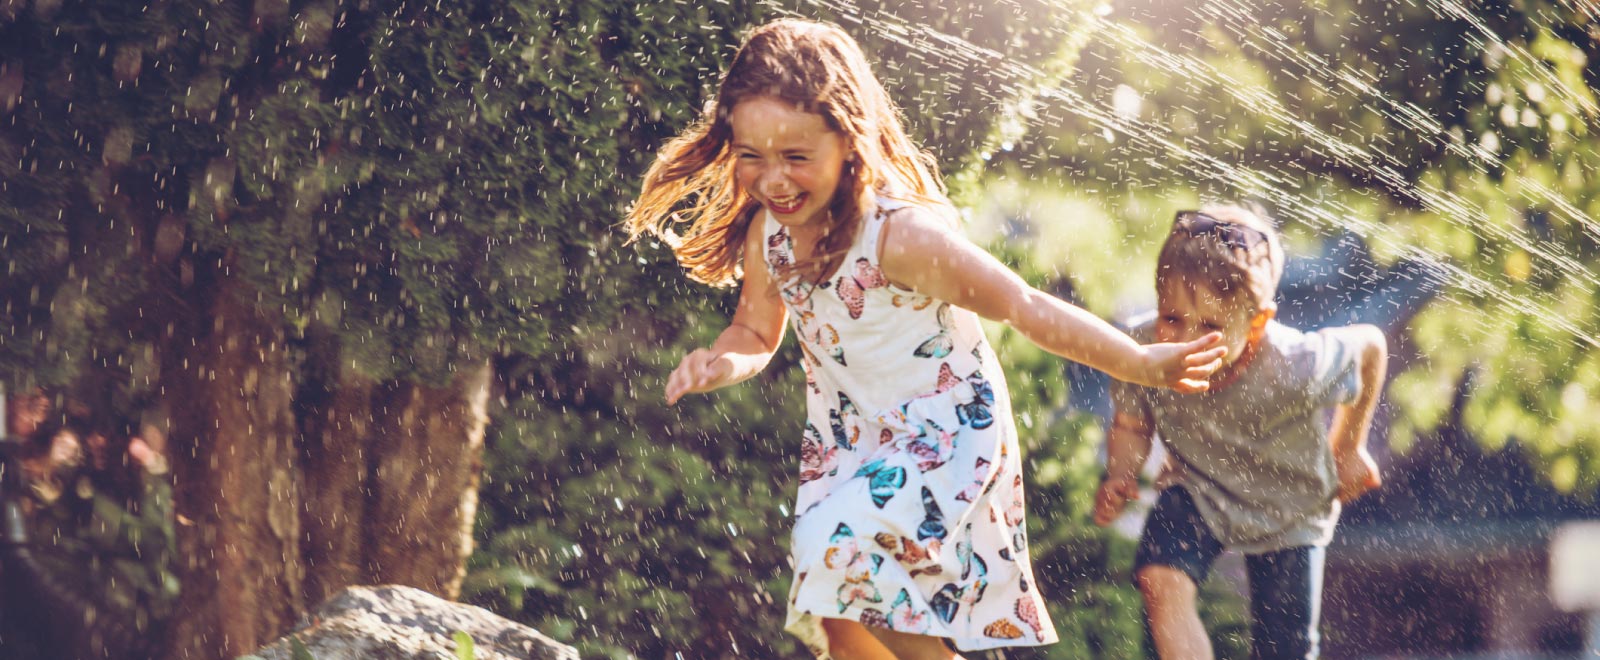 Two kids laughing and running under a sprinkler.